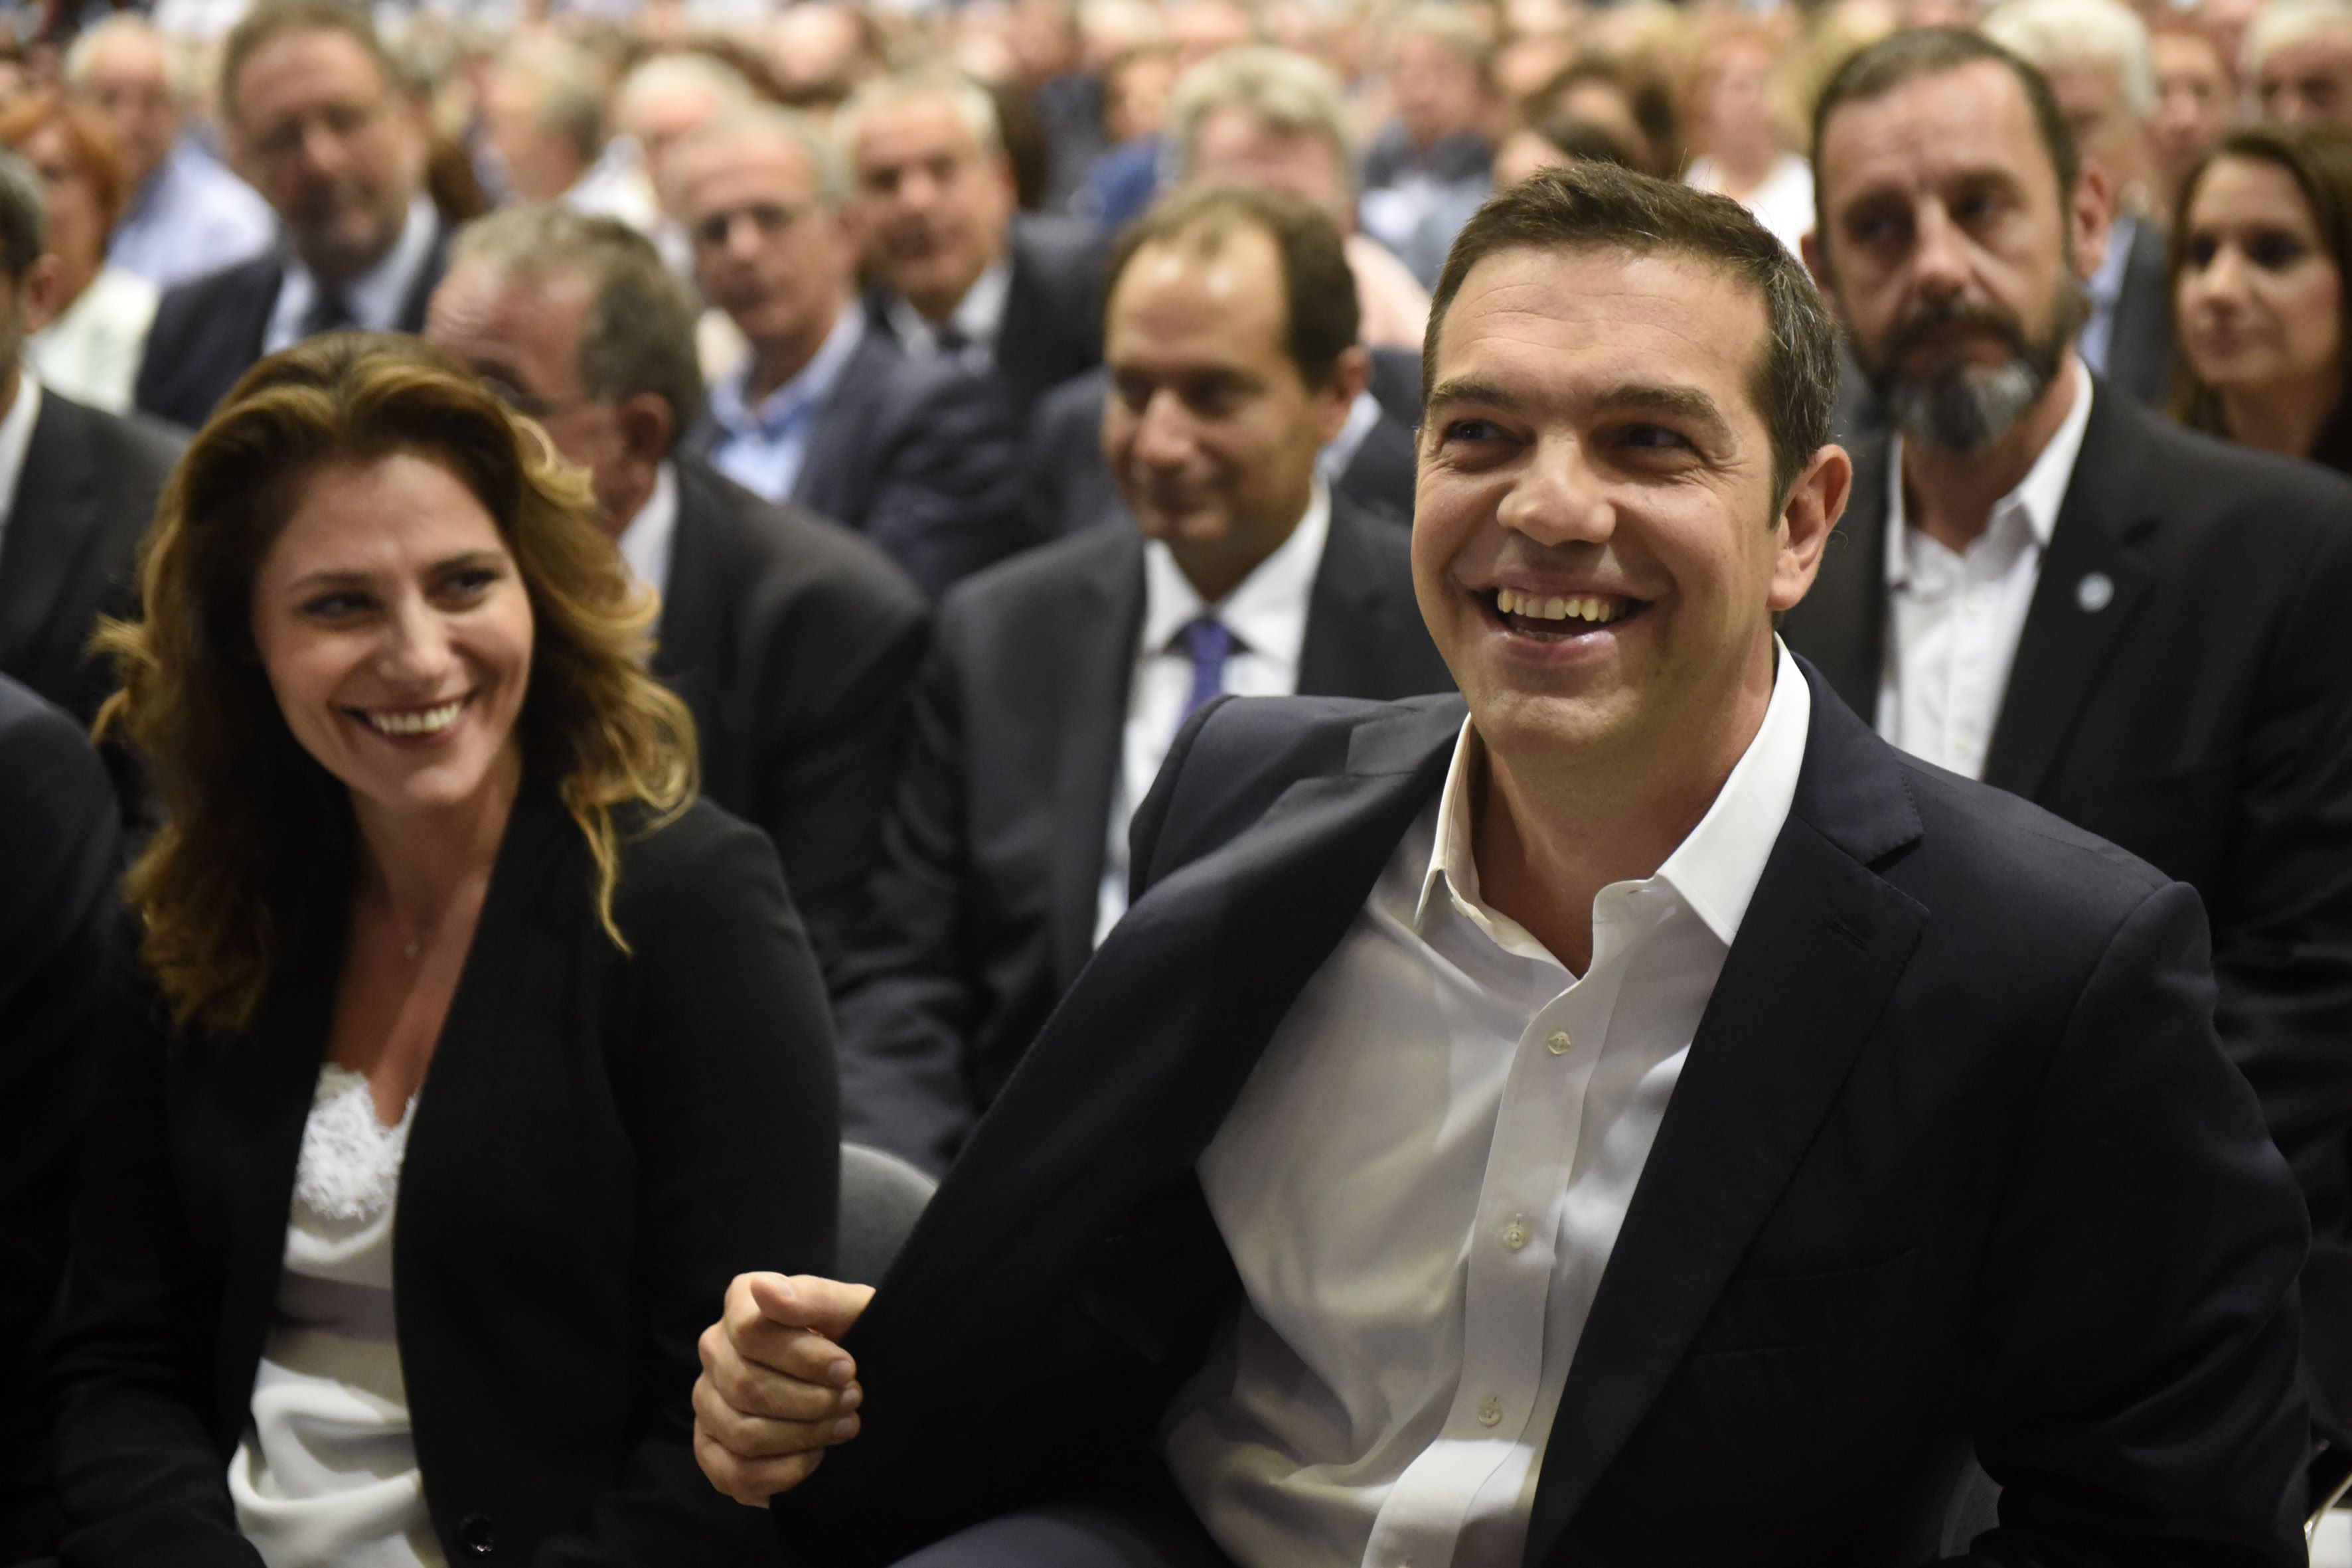 Greek PM vows bailout exit in 2018, help for workers, youth